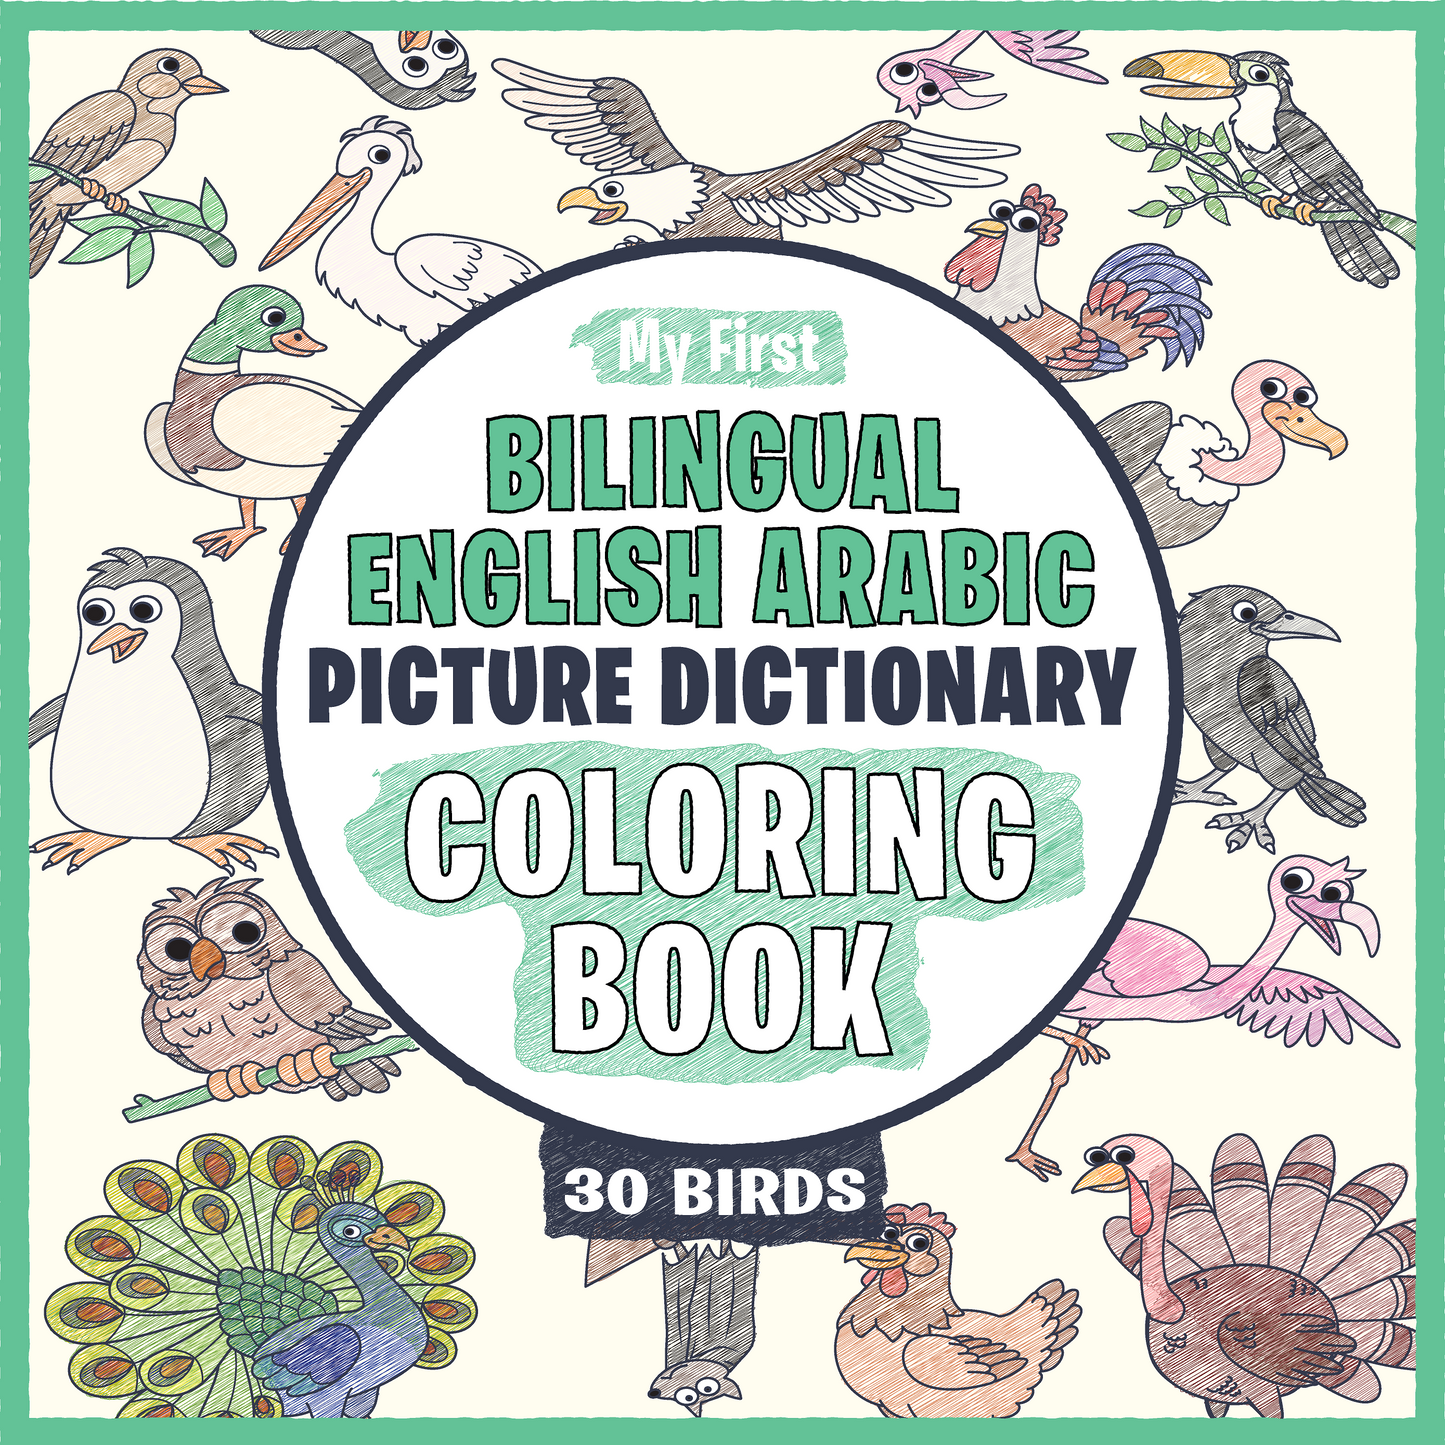 My First Bilingual English Arabic Picture Dictionary Coloring Book 30 Birds: Simple, Easy-to-Color Large Drawings With Animals Names, Cute Designs With Thick Black Outlines - Perfect for Toddlers Ages 1+